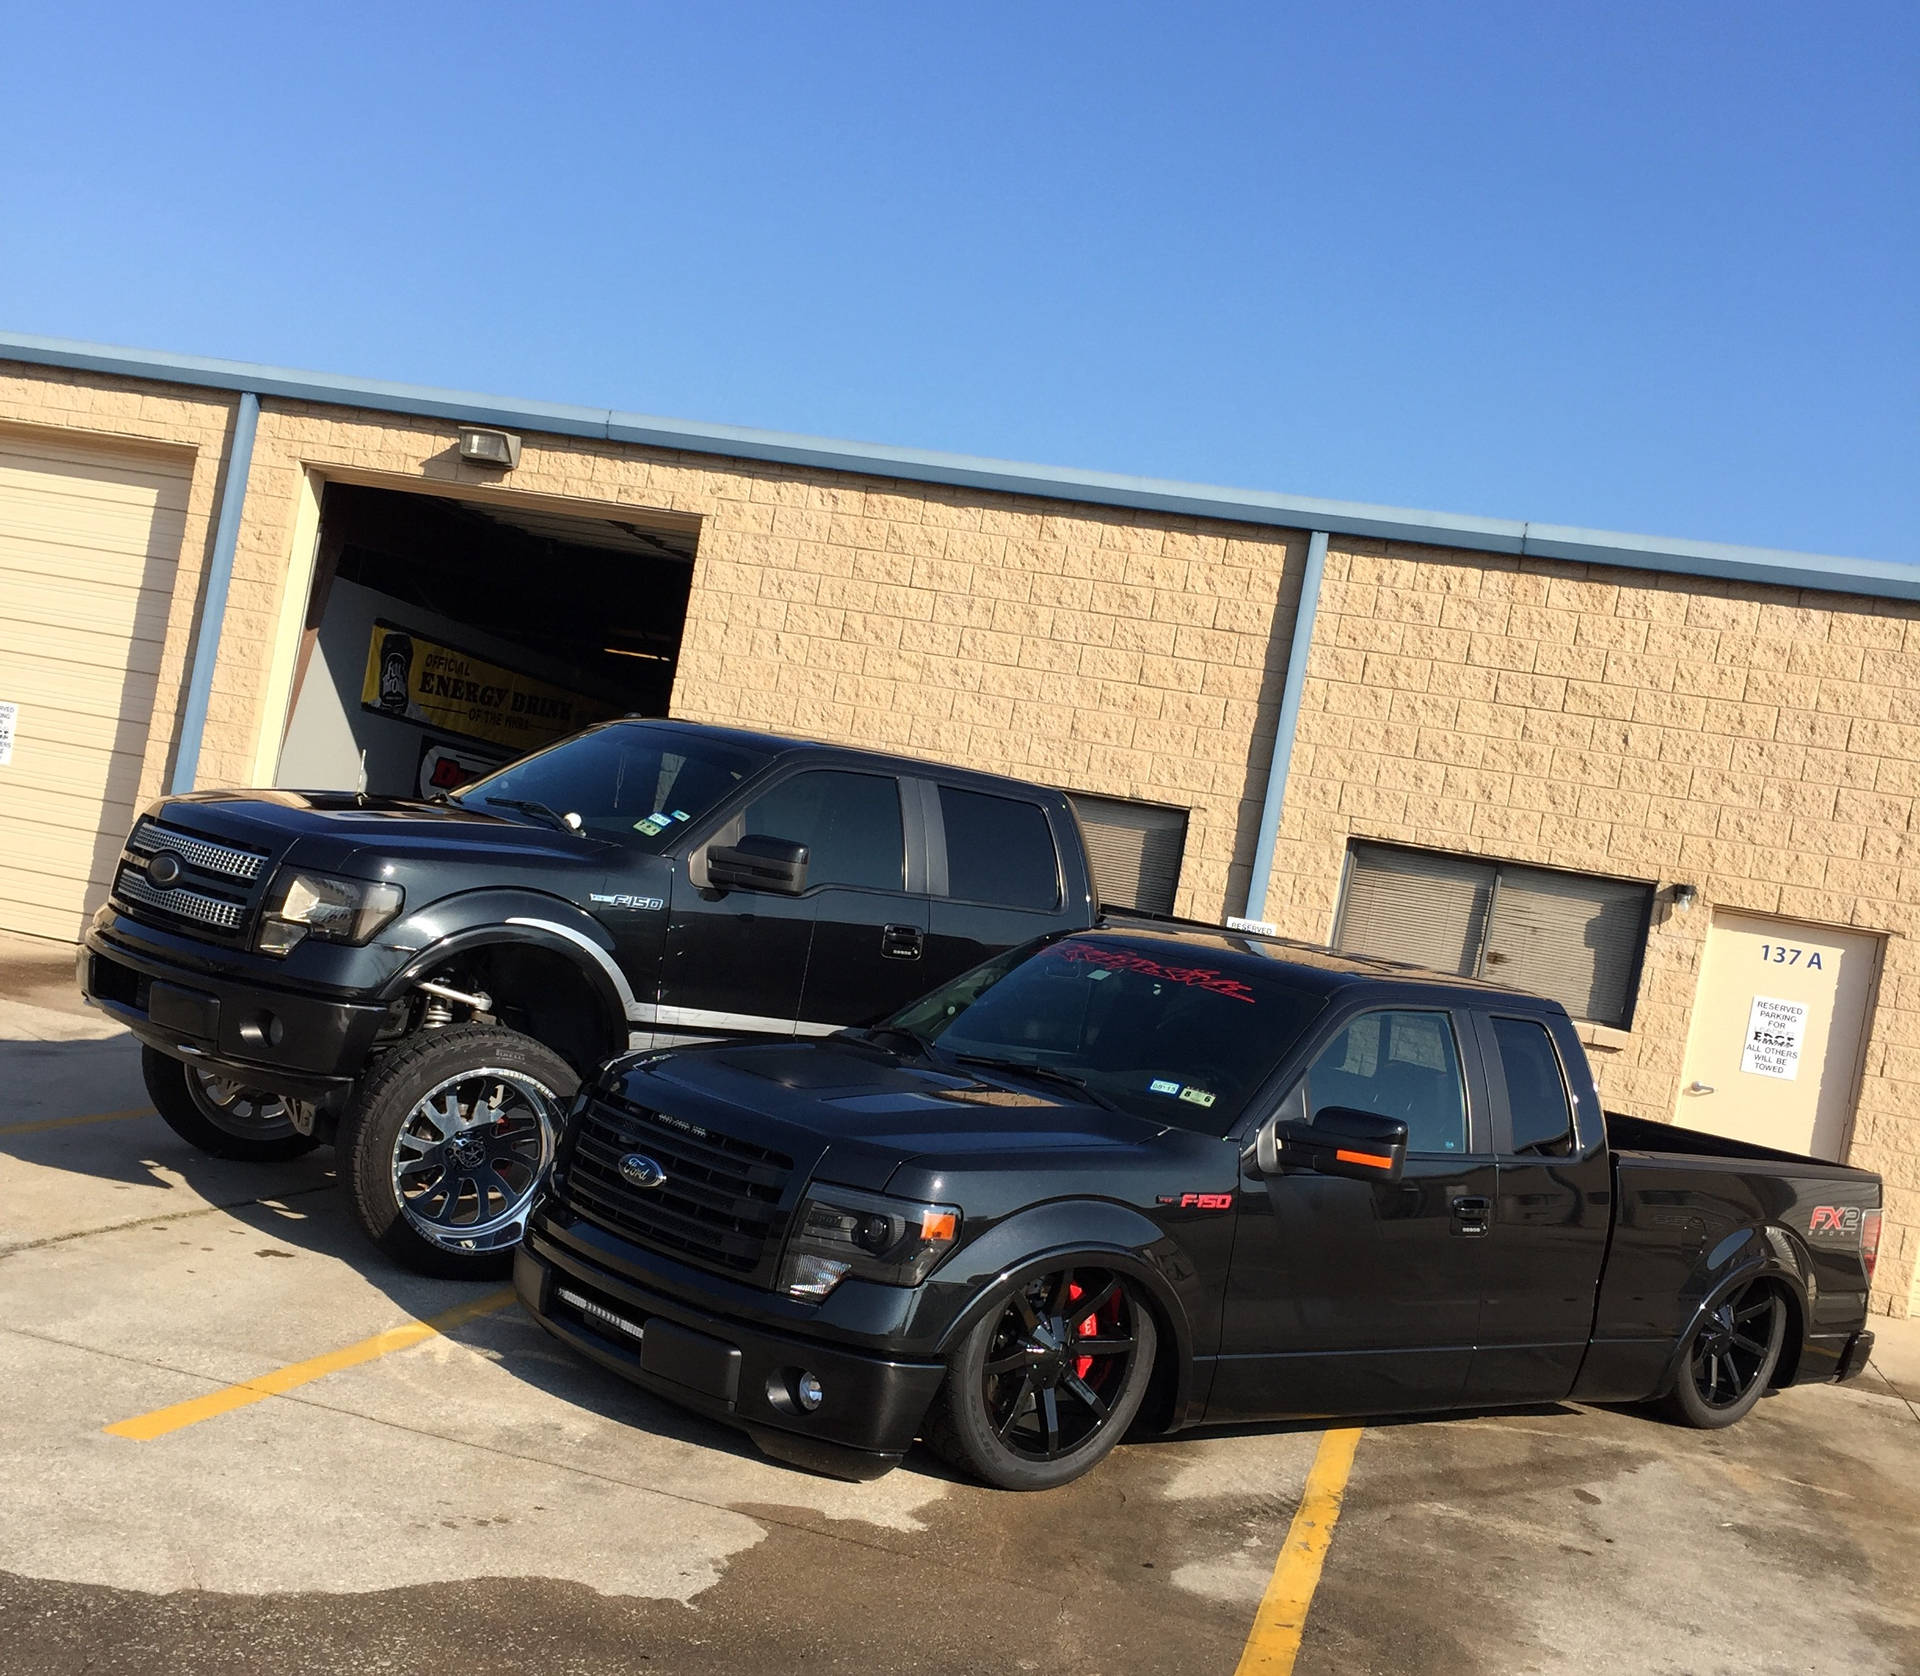 Black Lifted And Dropped Trucks